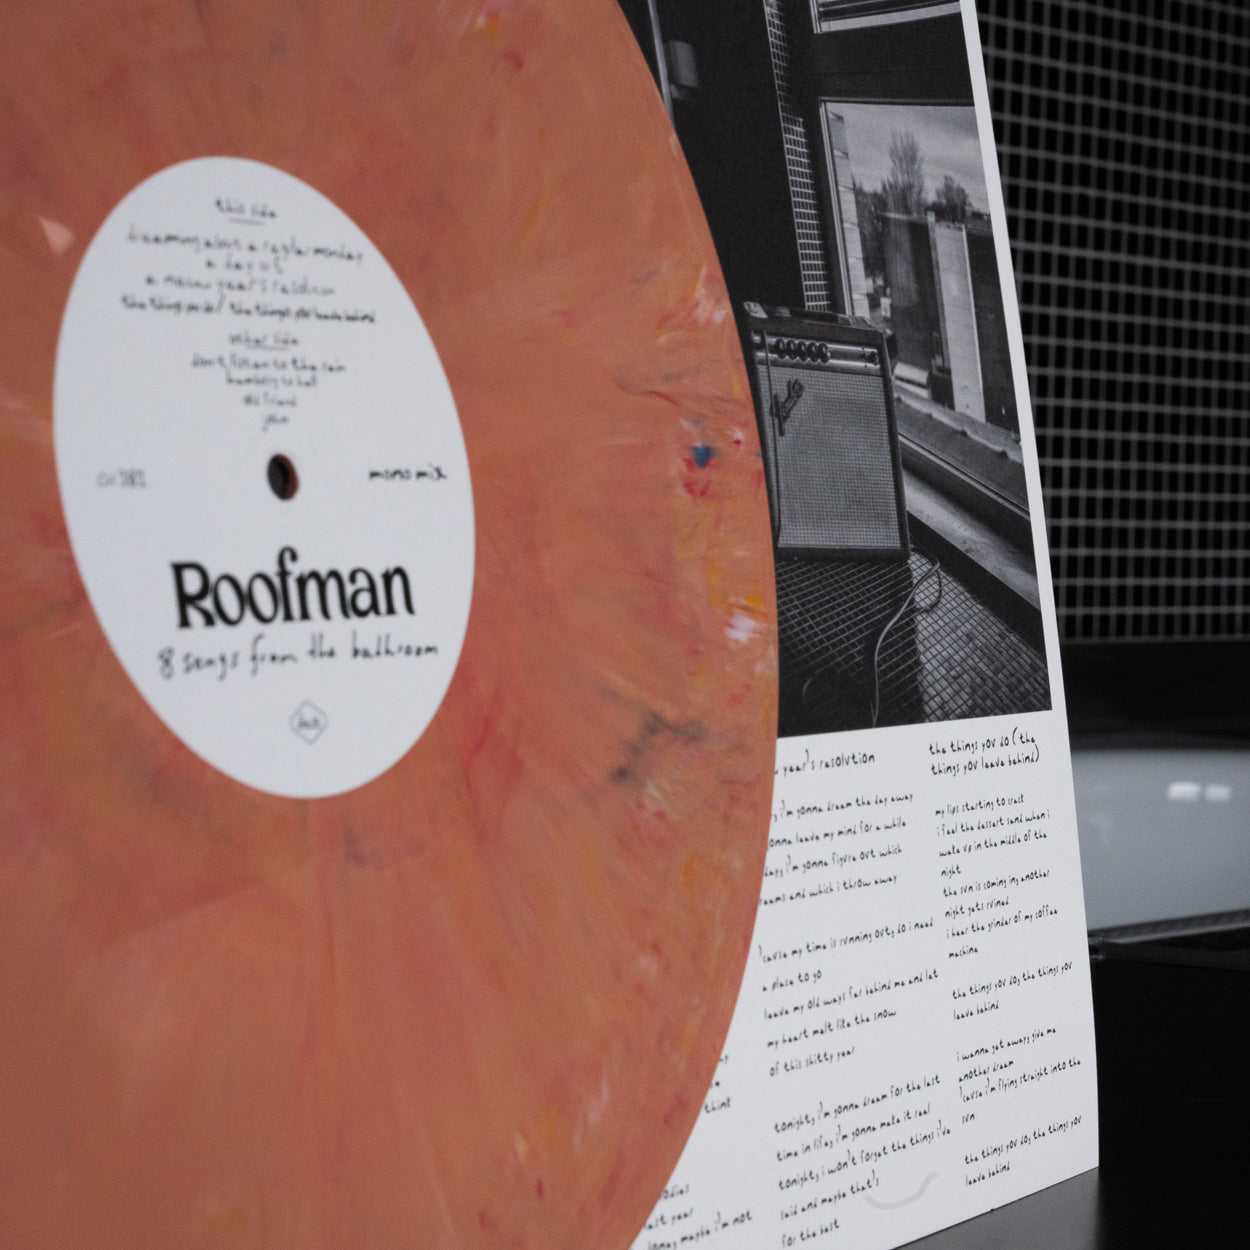 Roofman - 8 songs from the bathroom - 12"